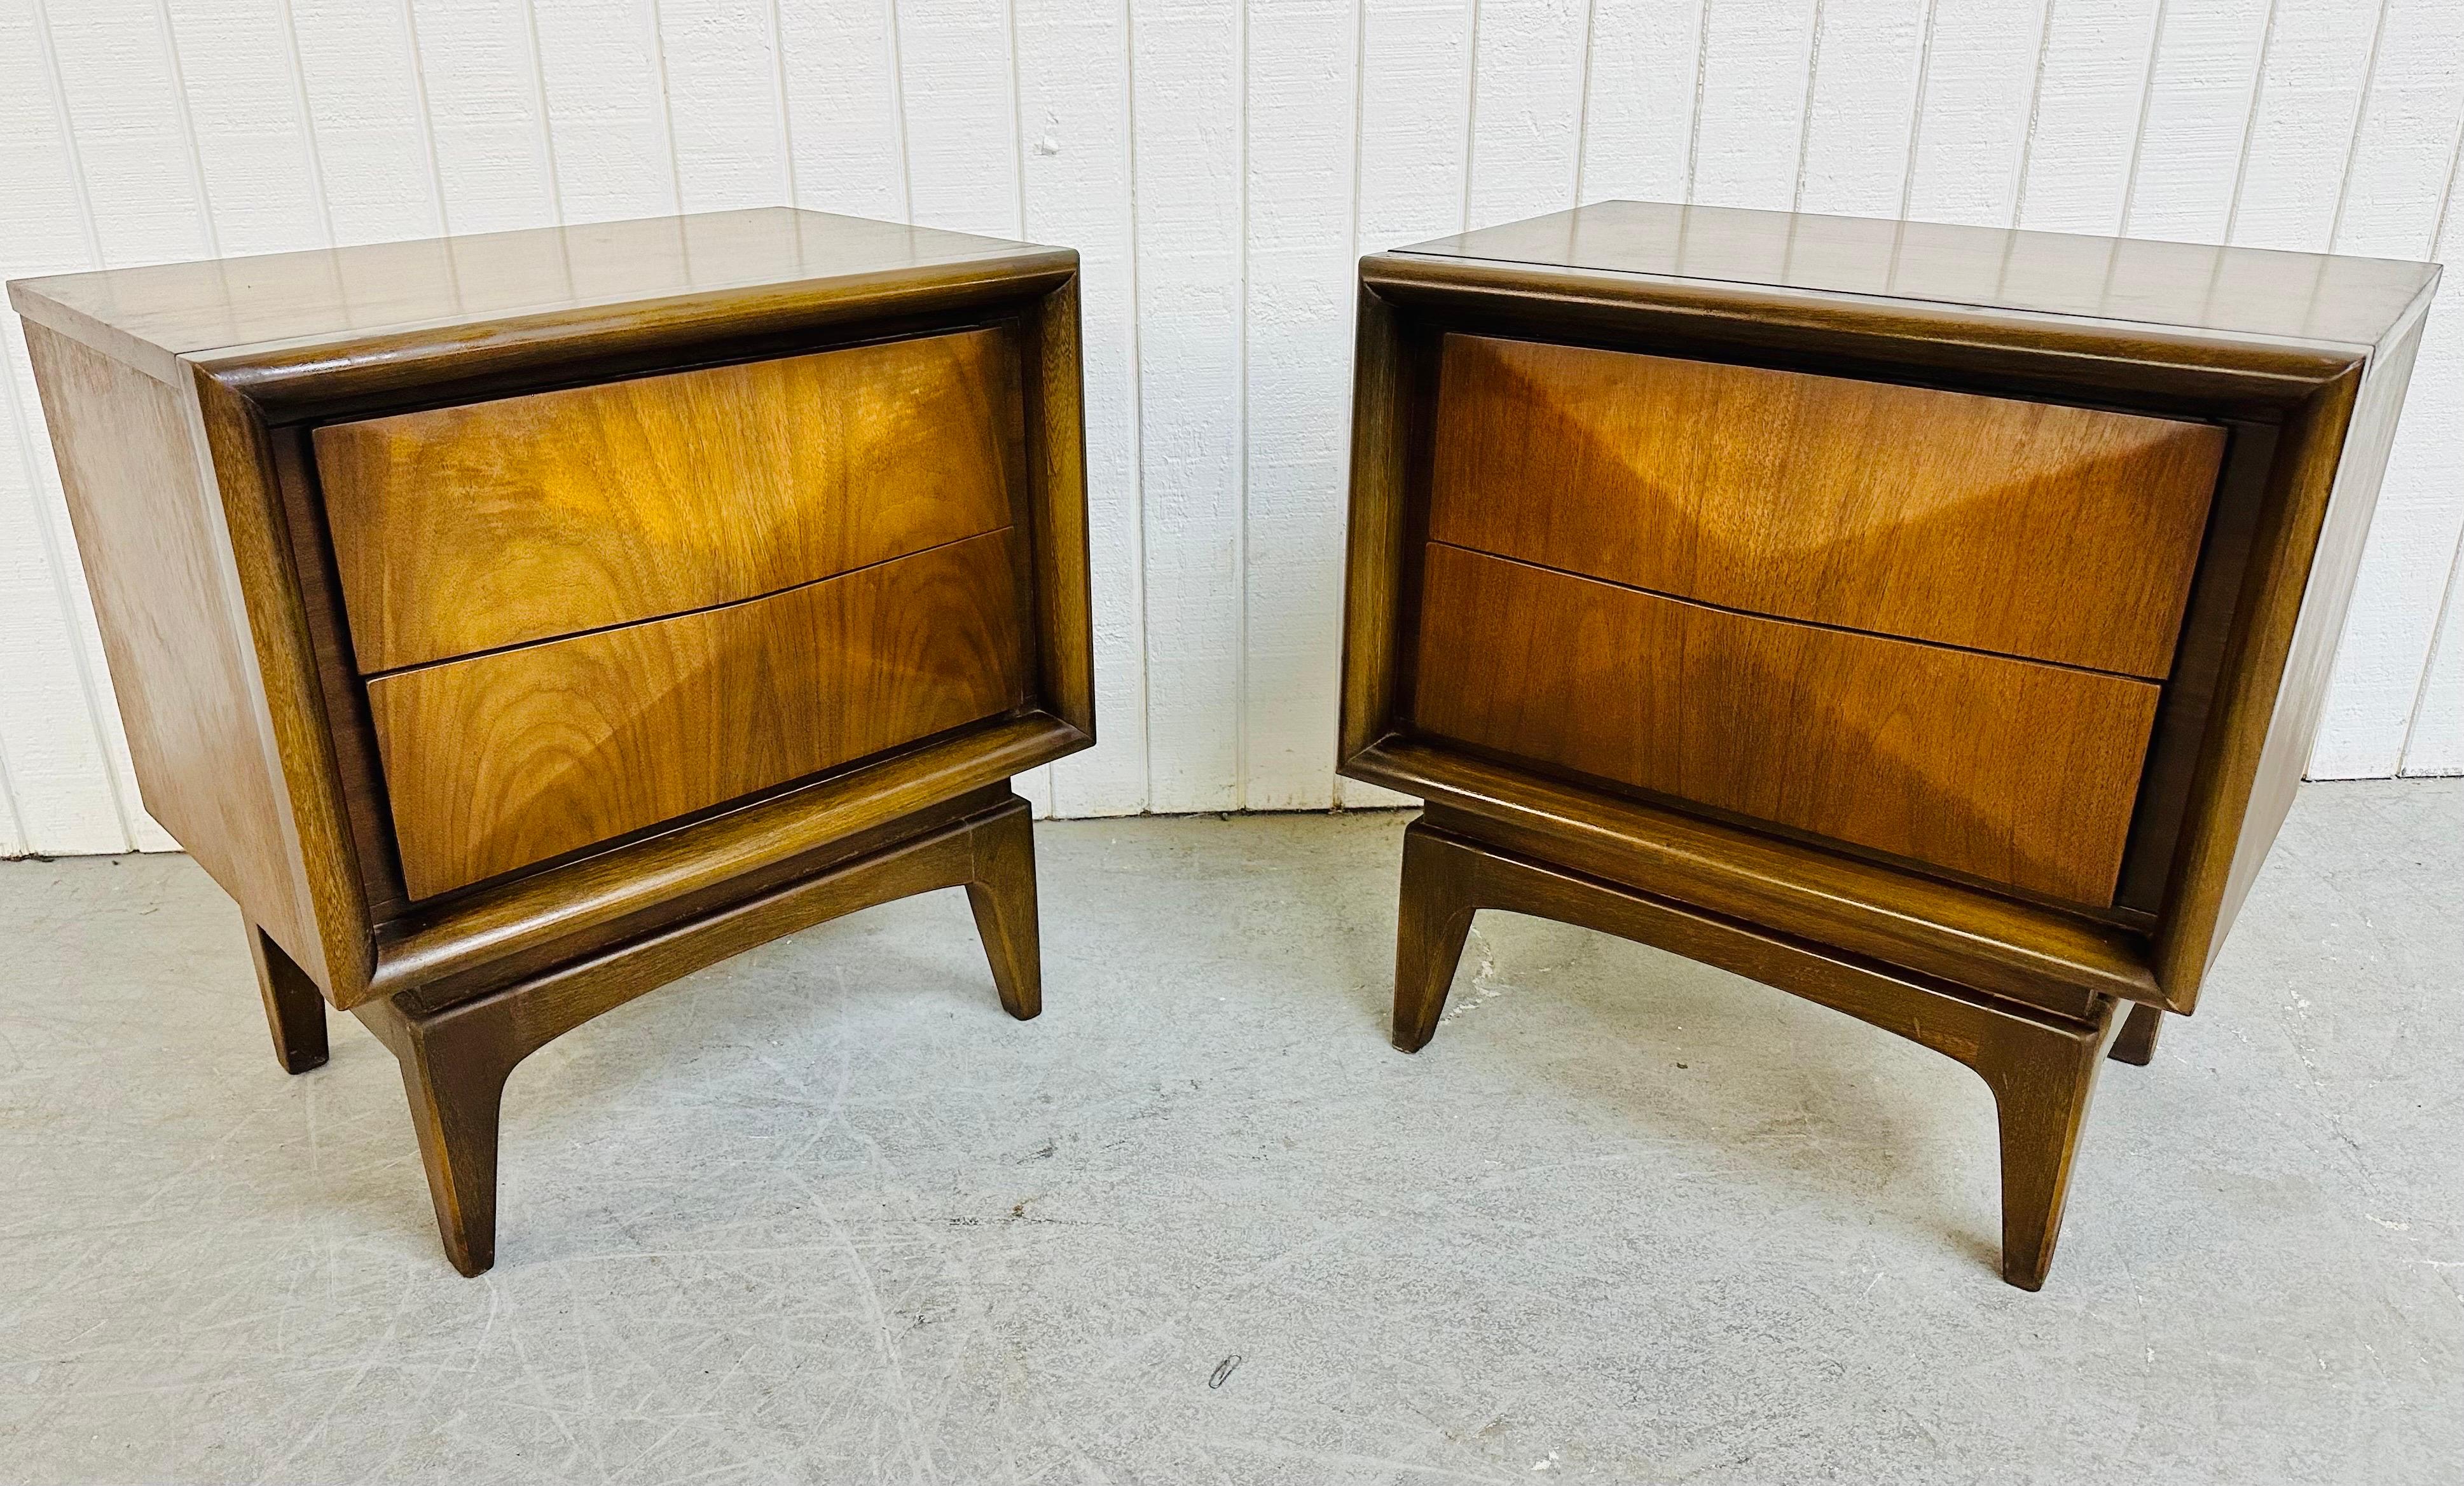 This listing is for a pair of Mid-Century Modern United Diamond Walnut Nightstands. Featuring a straight line body with a geometrical drawer design, two drawers for storage, modern legs, and a beautiful walnut finish. This is an exceptional